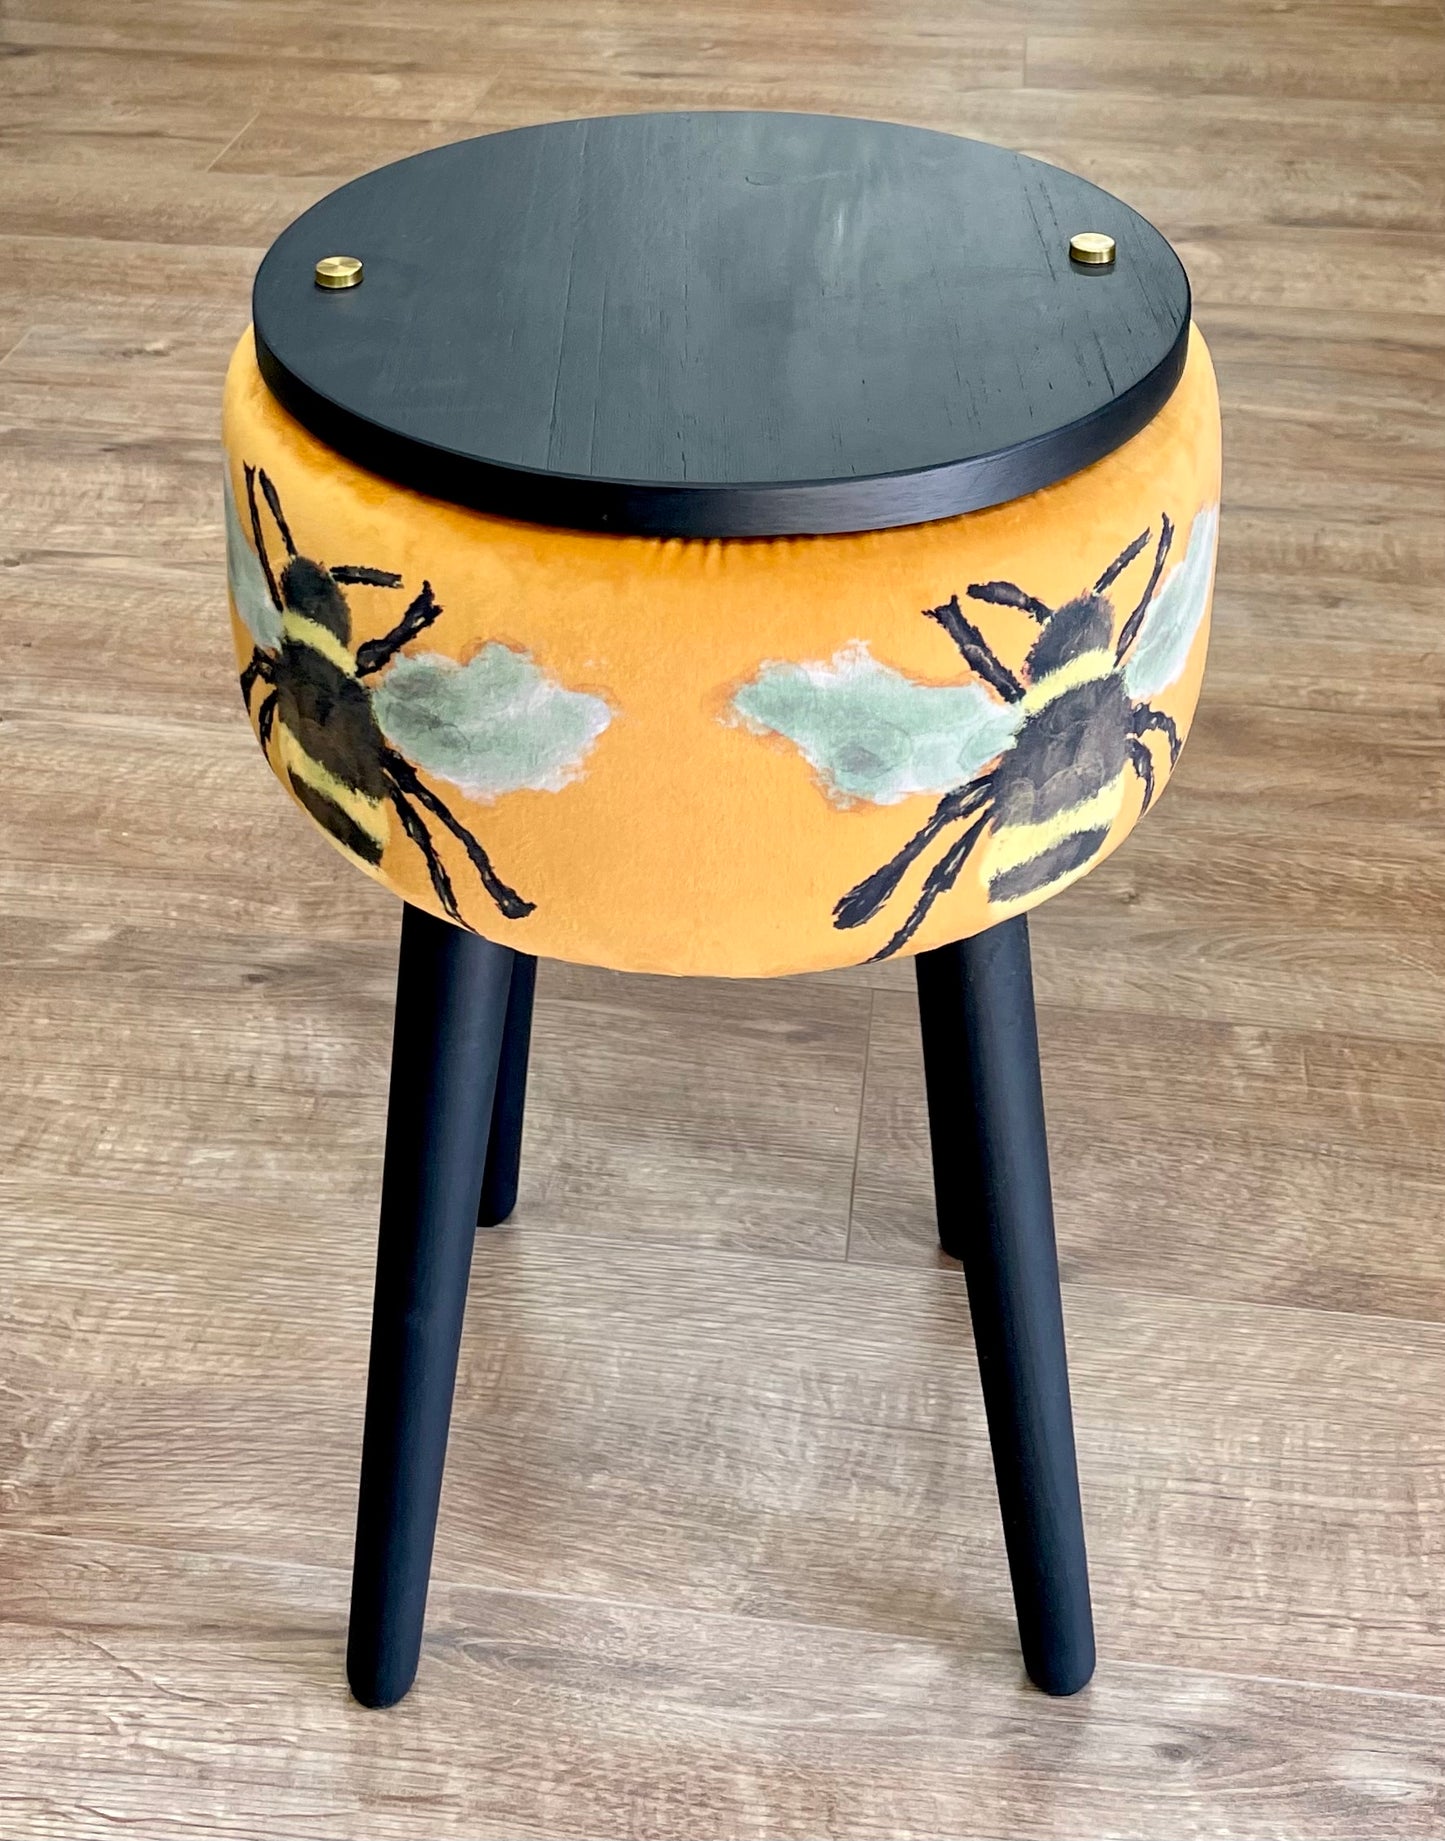 Bumble Bee End Table with Matt Black Wooden Legs and Top